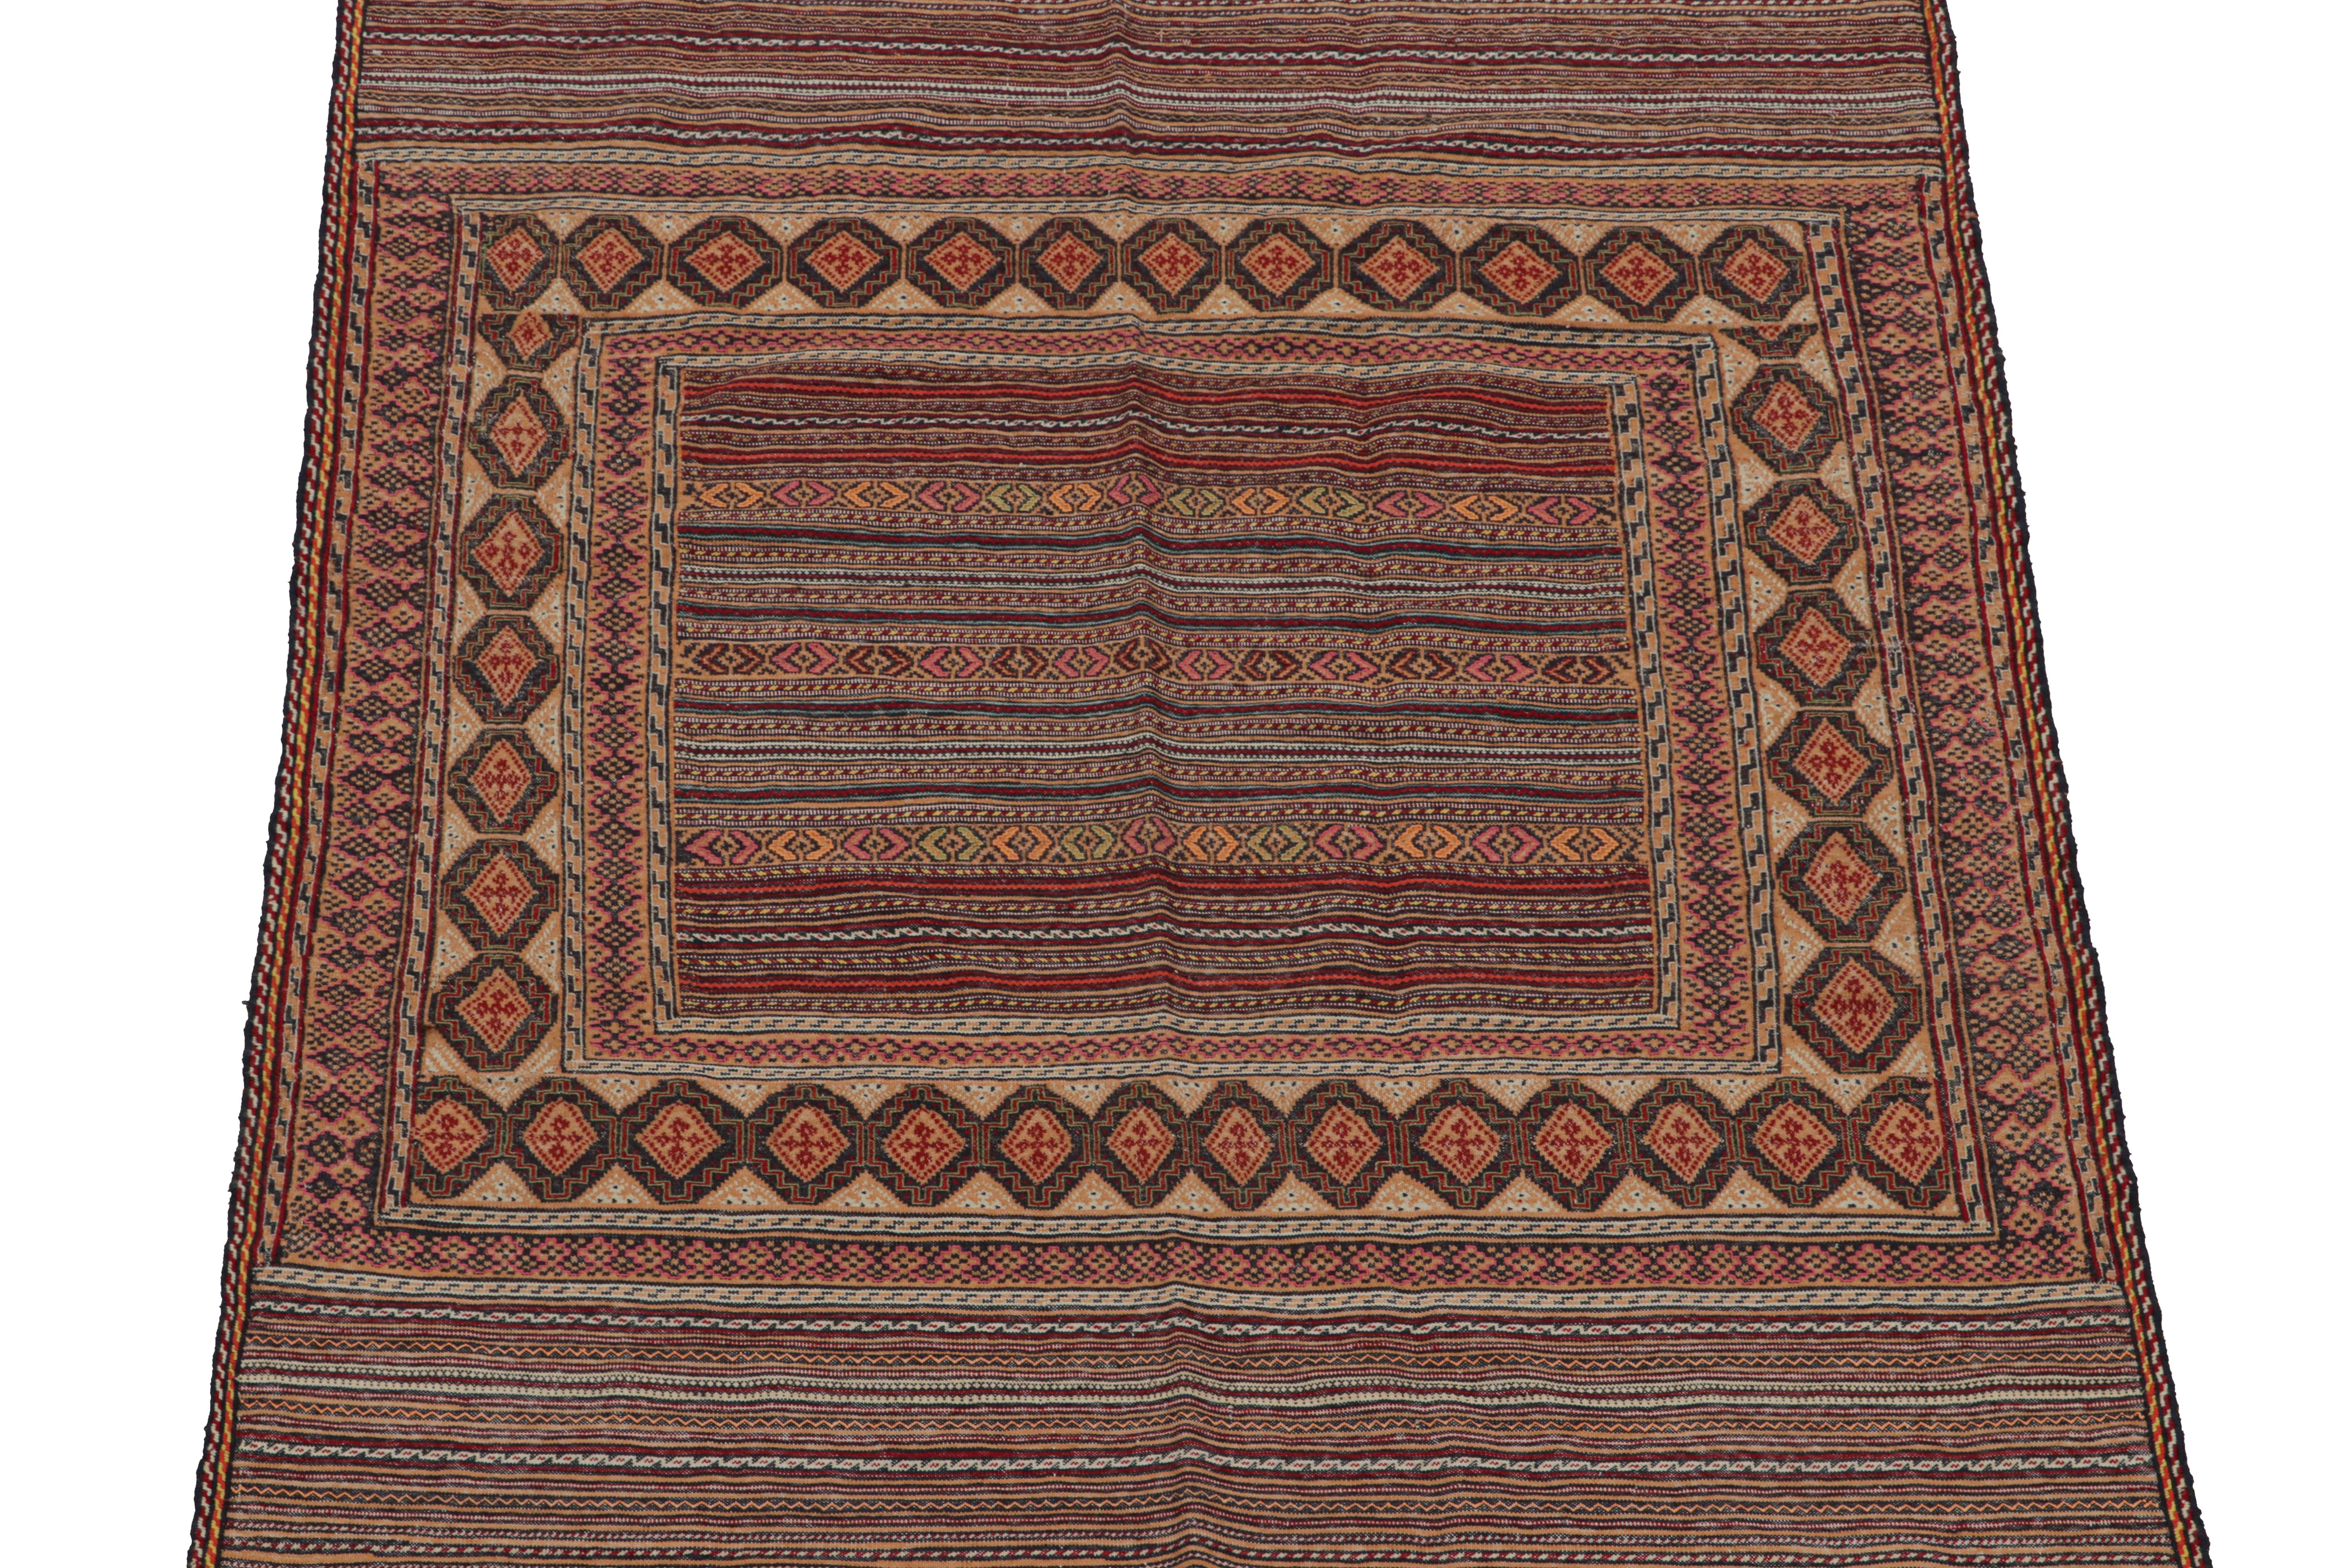 Tribal Vintage Baluch Kilim in Beige-Brown with Geometric Patterns, from Rug & Kilim For Sale